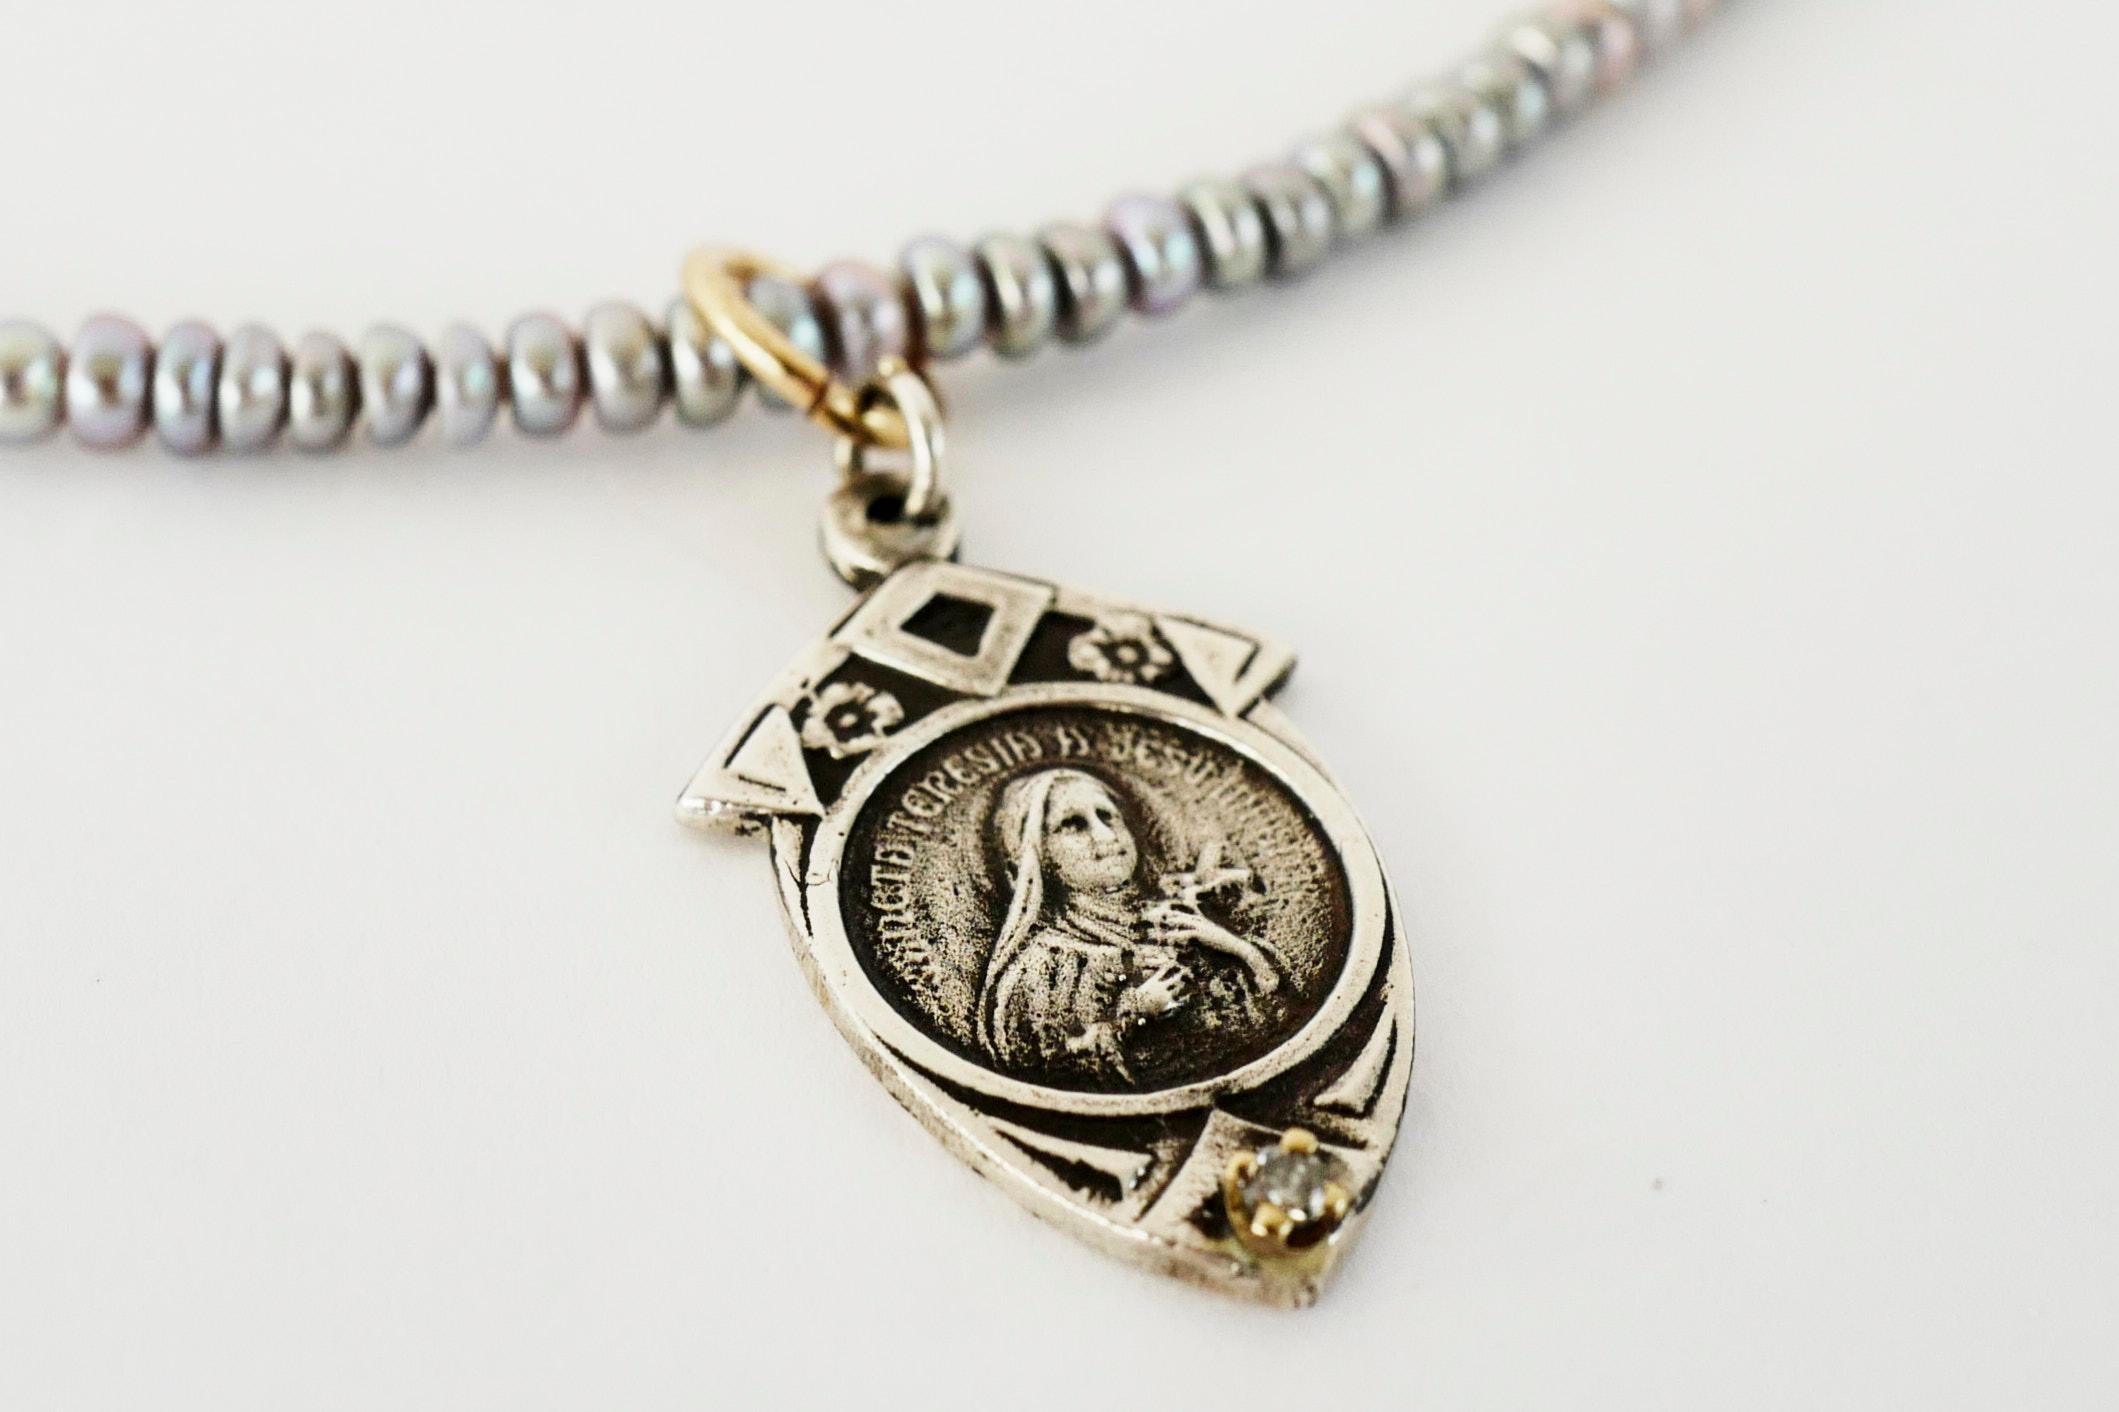 Brilliant Cut Medal Virgin Mary Necklace Bead Silver Pendant Pearl Turquoise J Dauphin For Sale